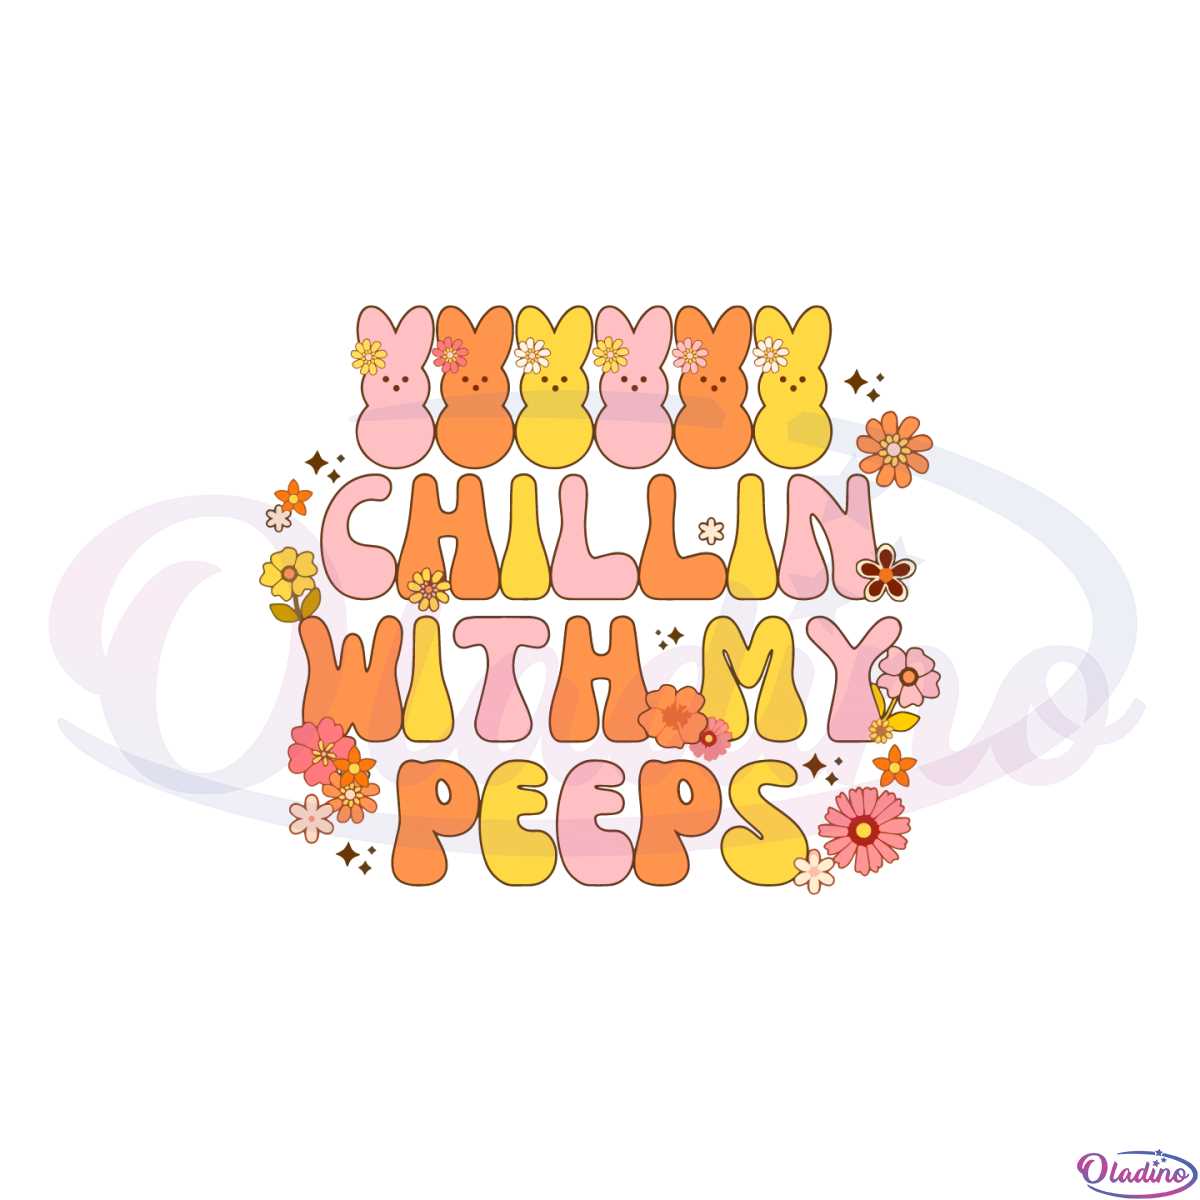 chillin-with-my-peeps-easter-groovy-easter-peeps-svg-cutting-files